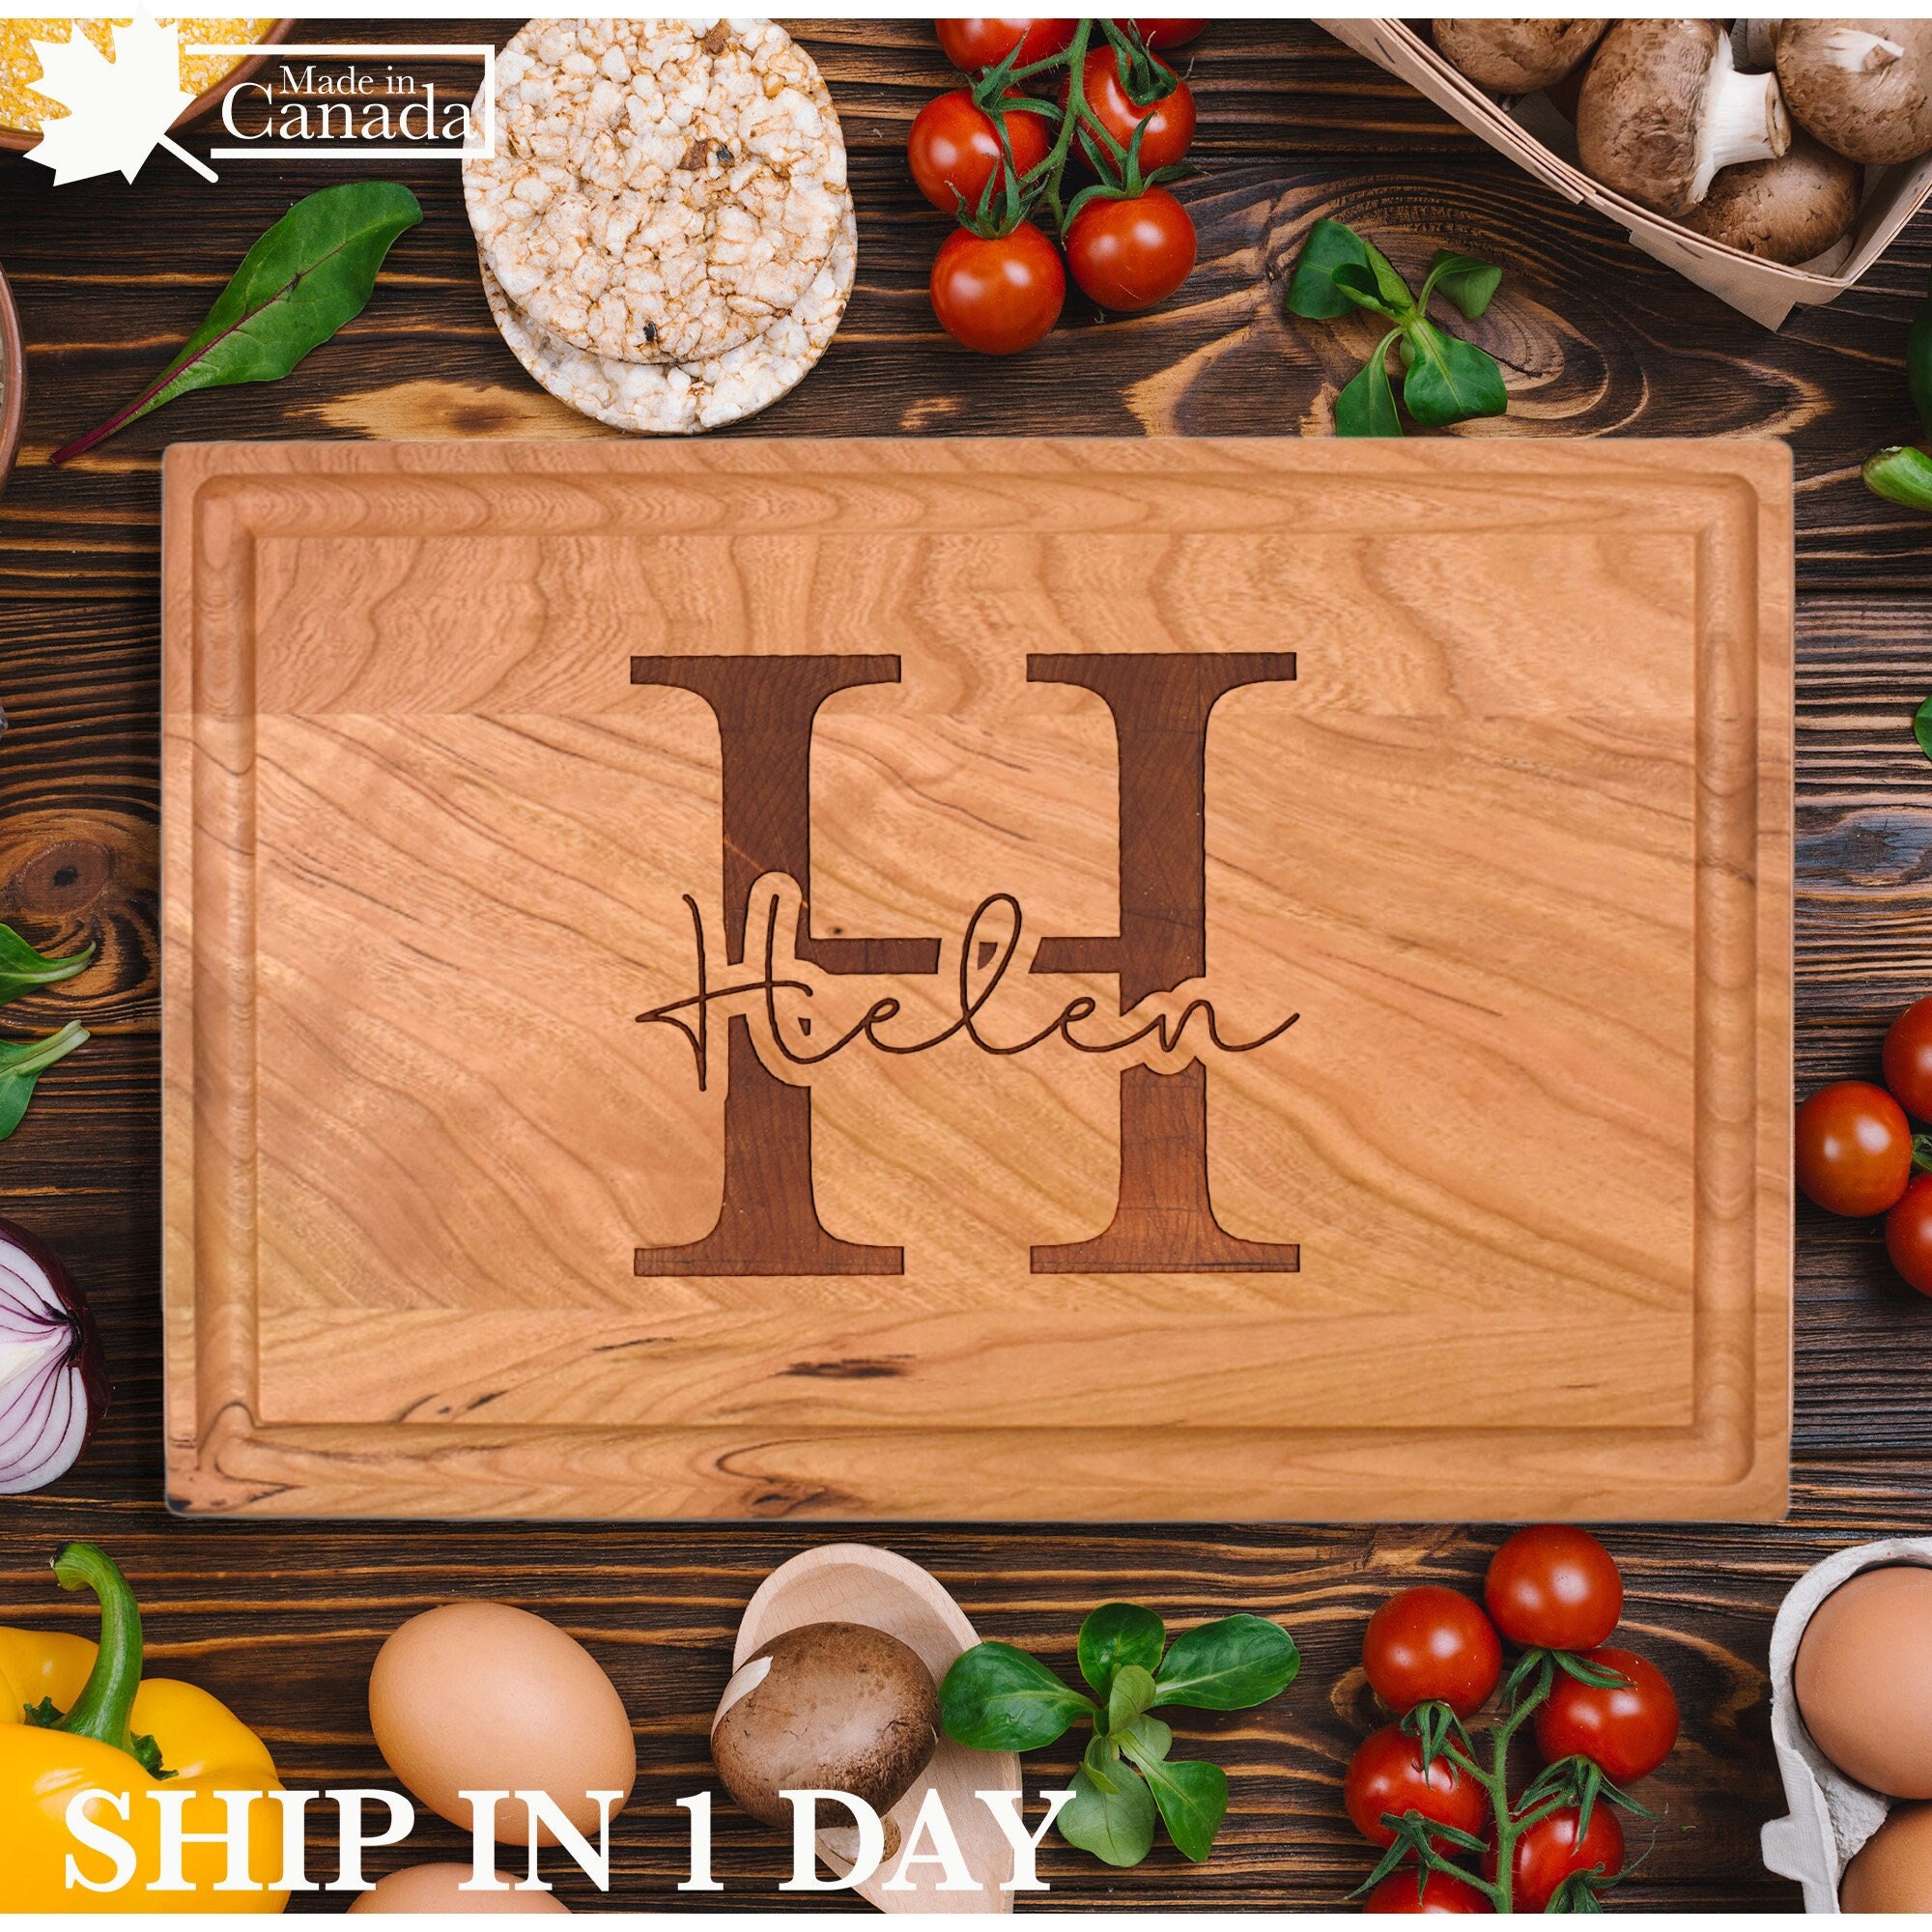 Wedding Gift for Couple, Bridal Shower Gifts for Bride and Groom  Engagement, Happy Marriage Cutting Board, Gifts for Engagement Wedding,  Newlywed Mr and Mrs Gifts Bride To Be Gifts - Yahoo Shopping